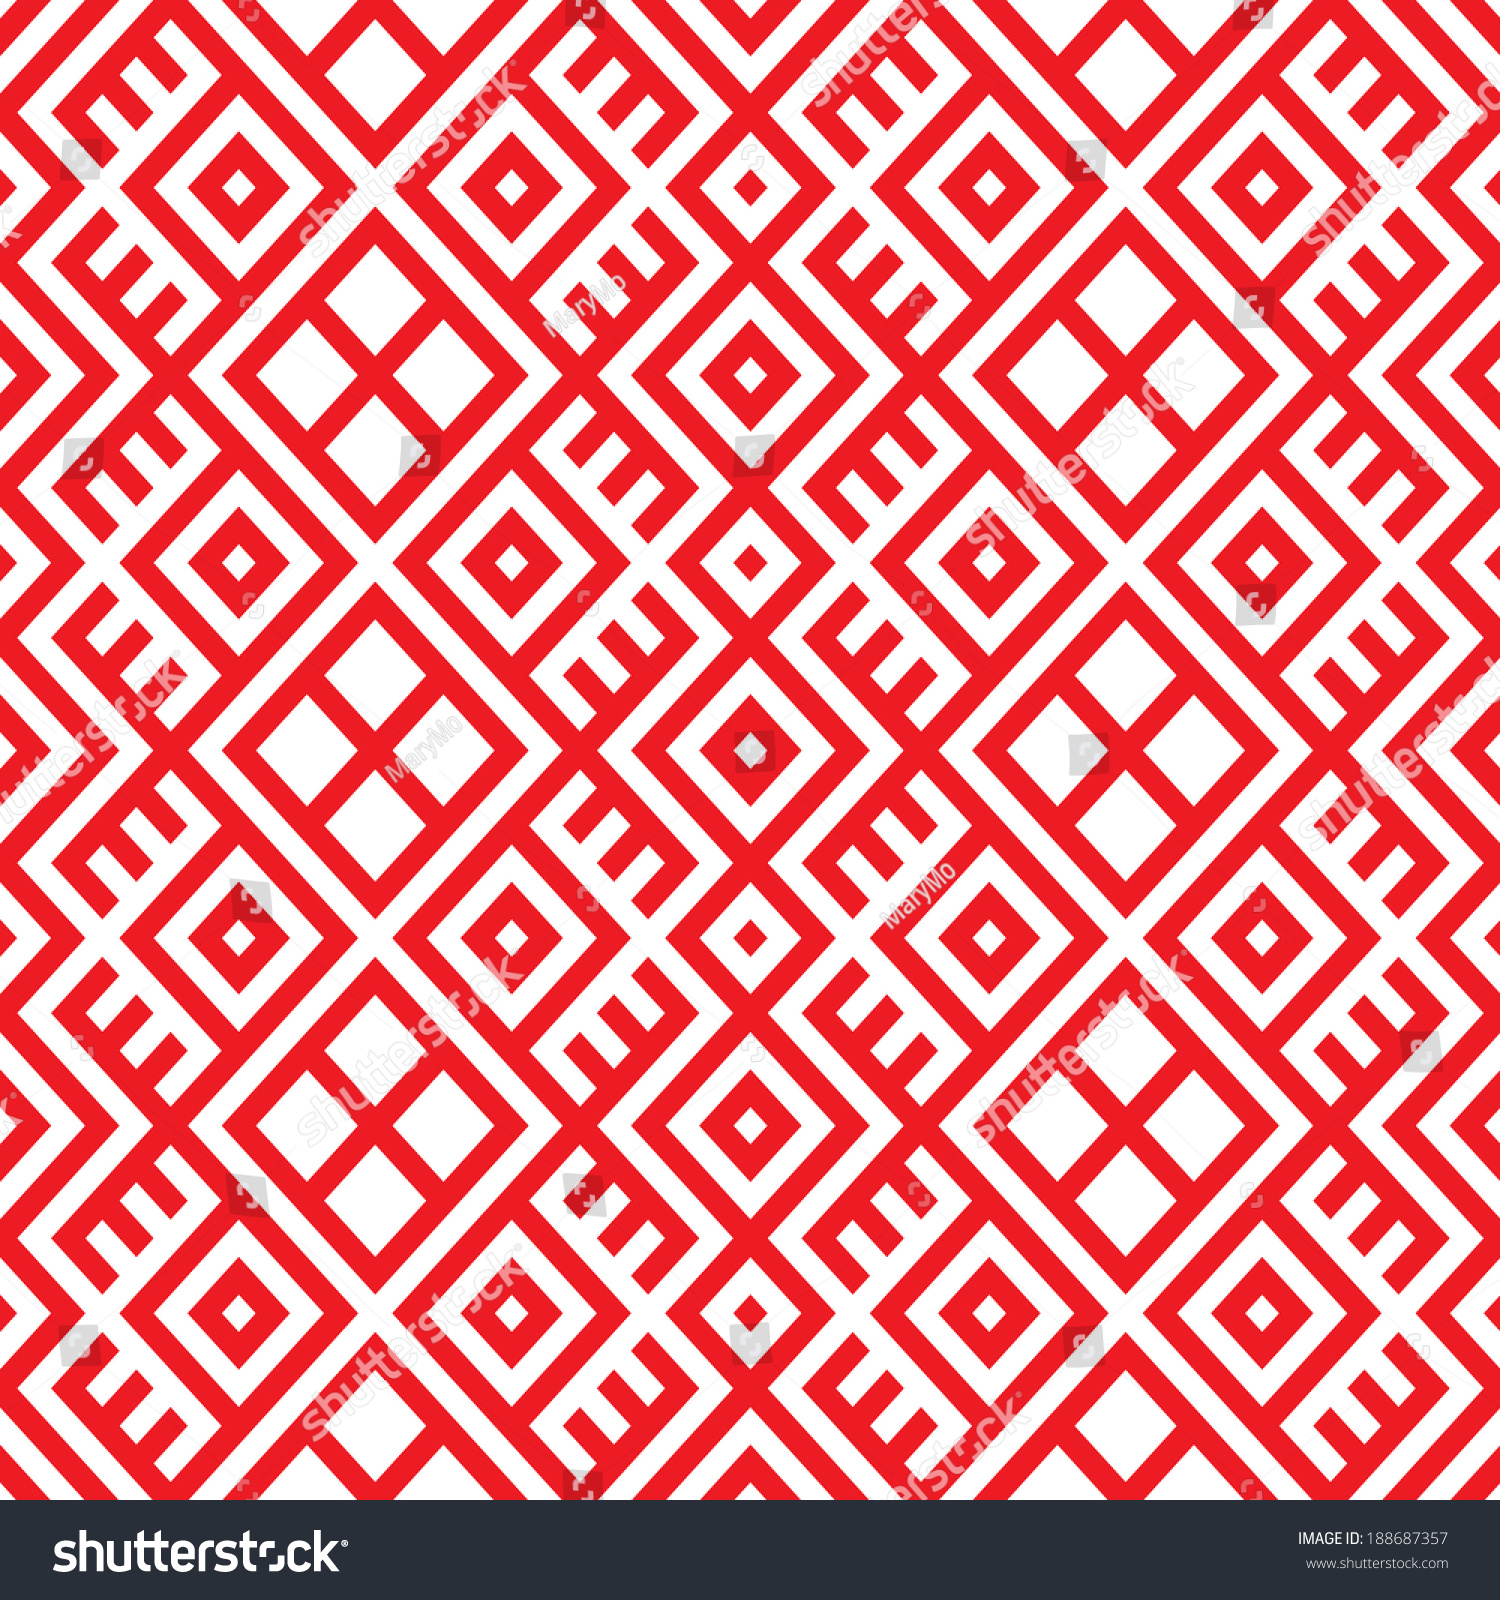 Geometric Seamless Ethnic Pattern Background In Red And White Colors Vector Illustration